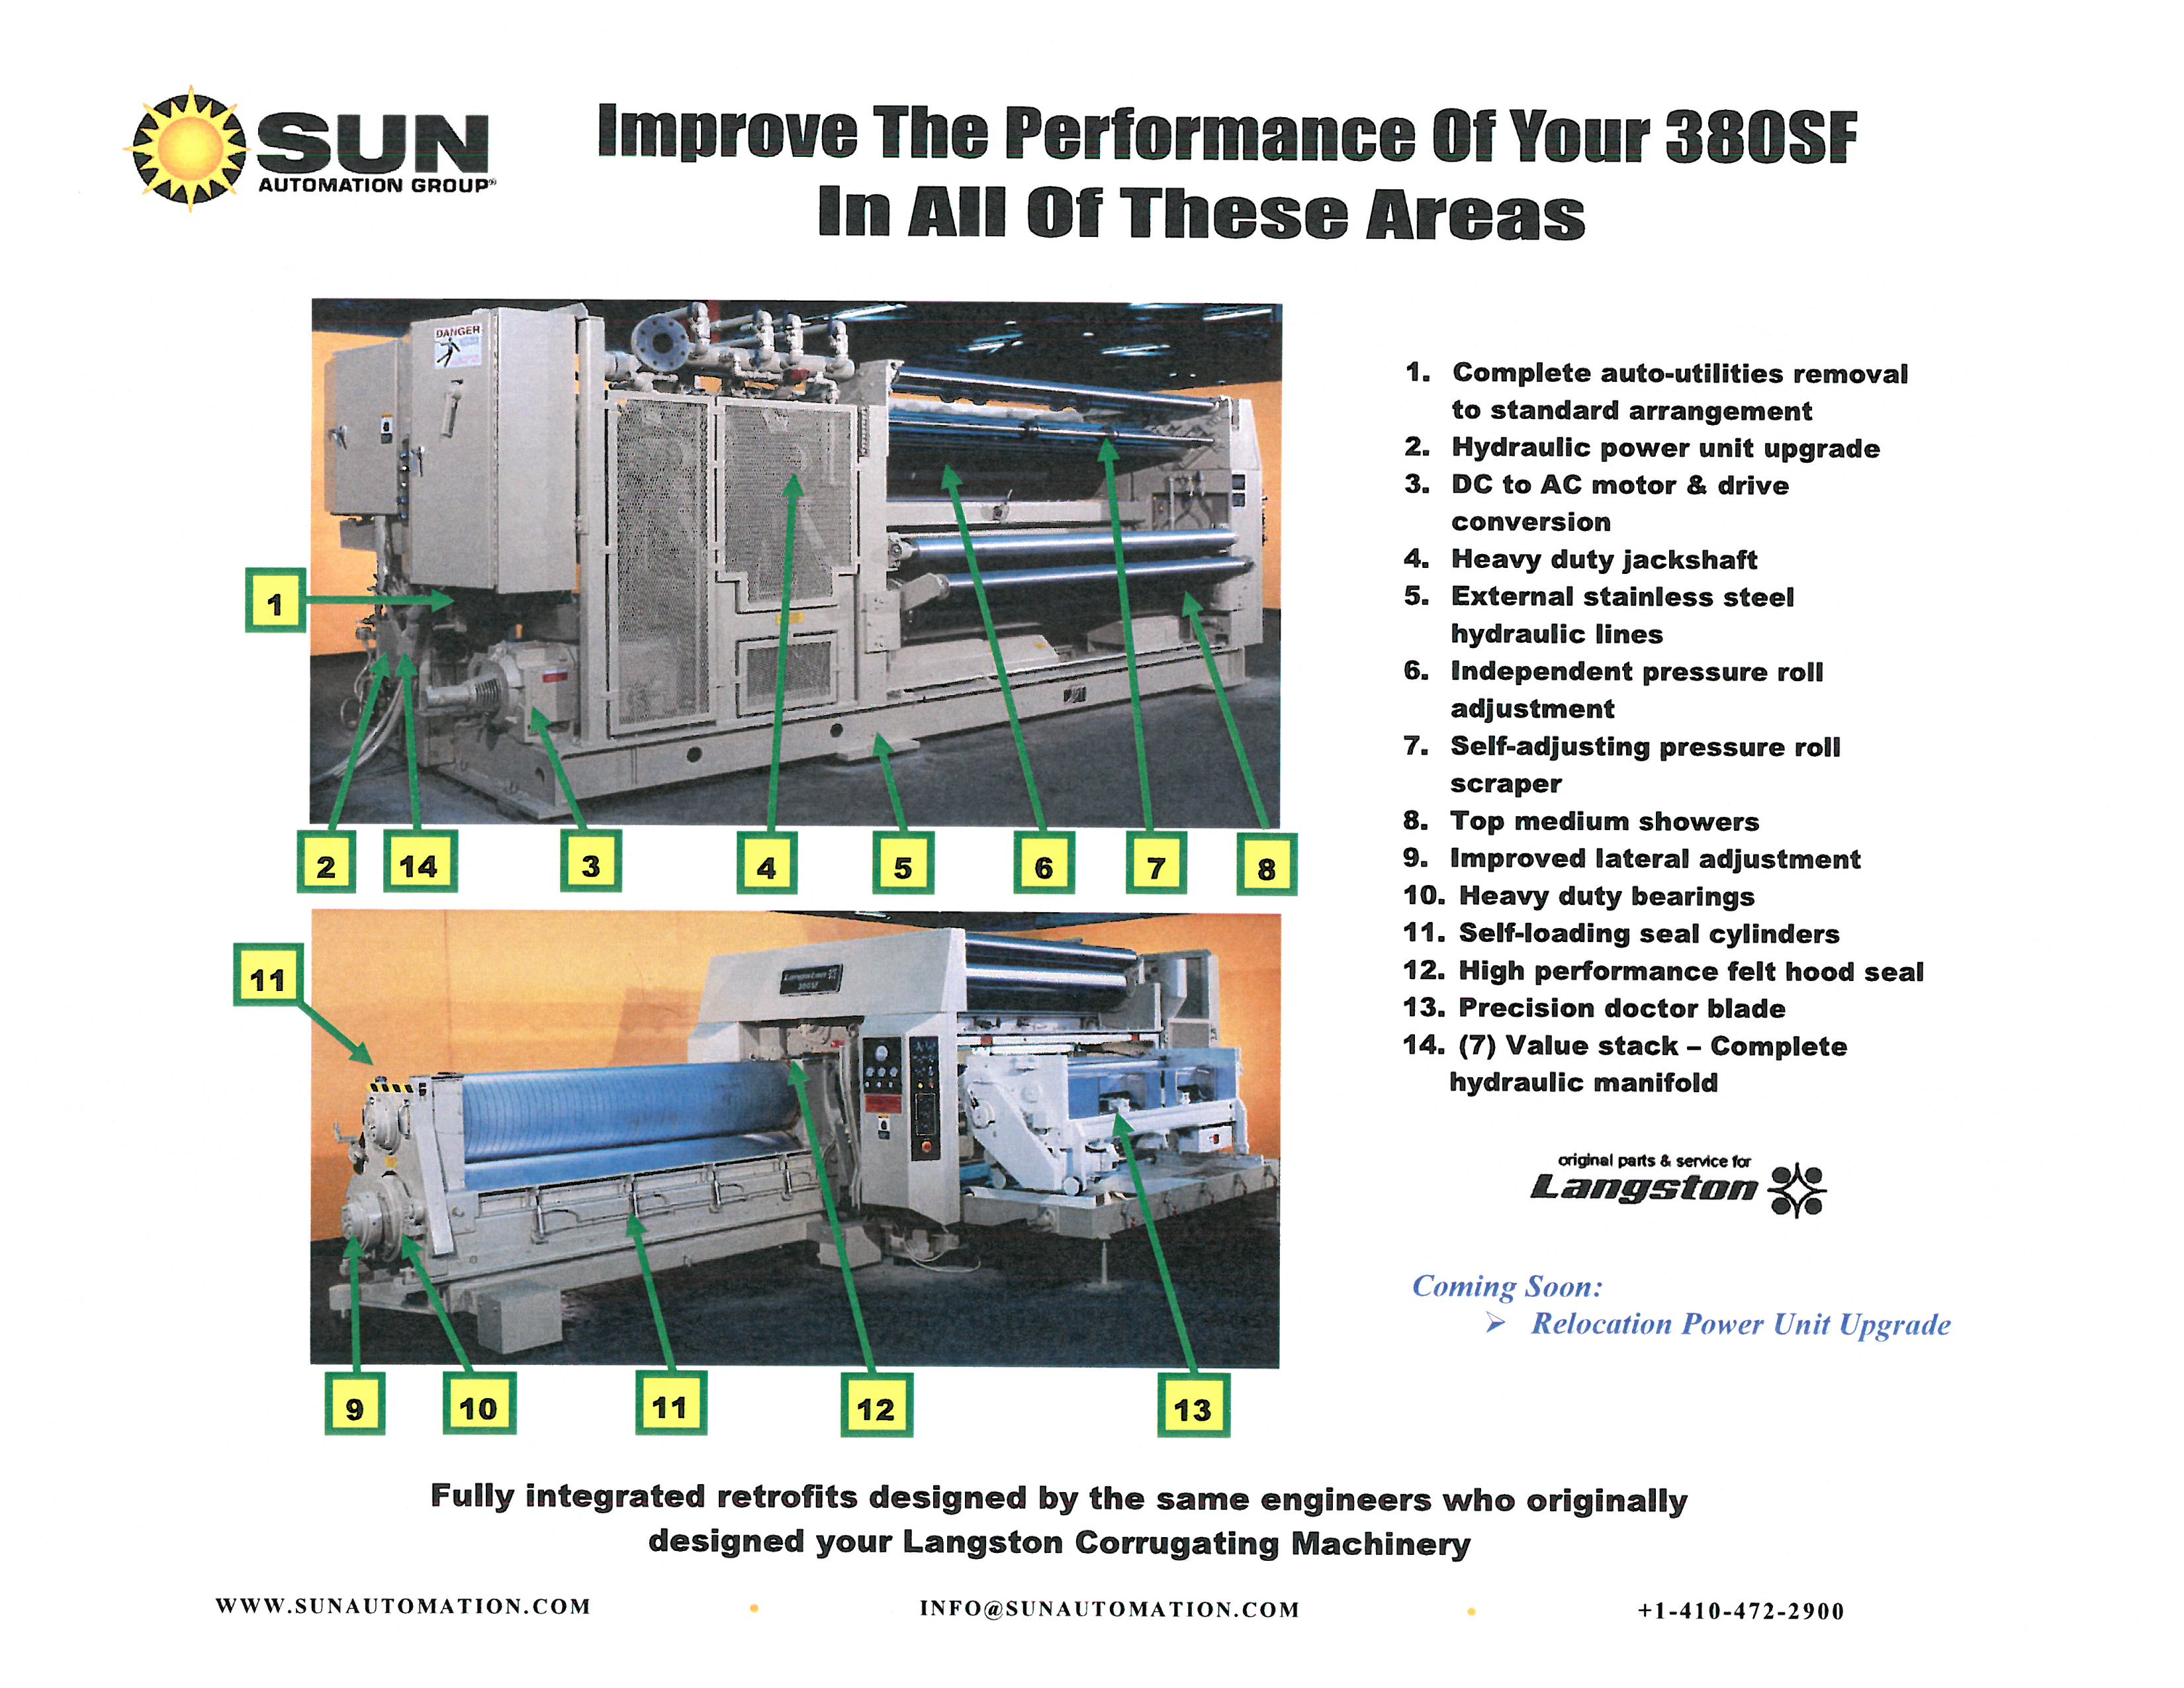 Improve the Performance of Your 380SF